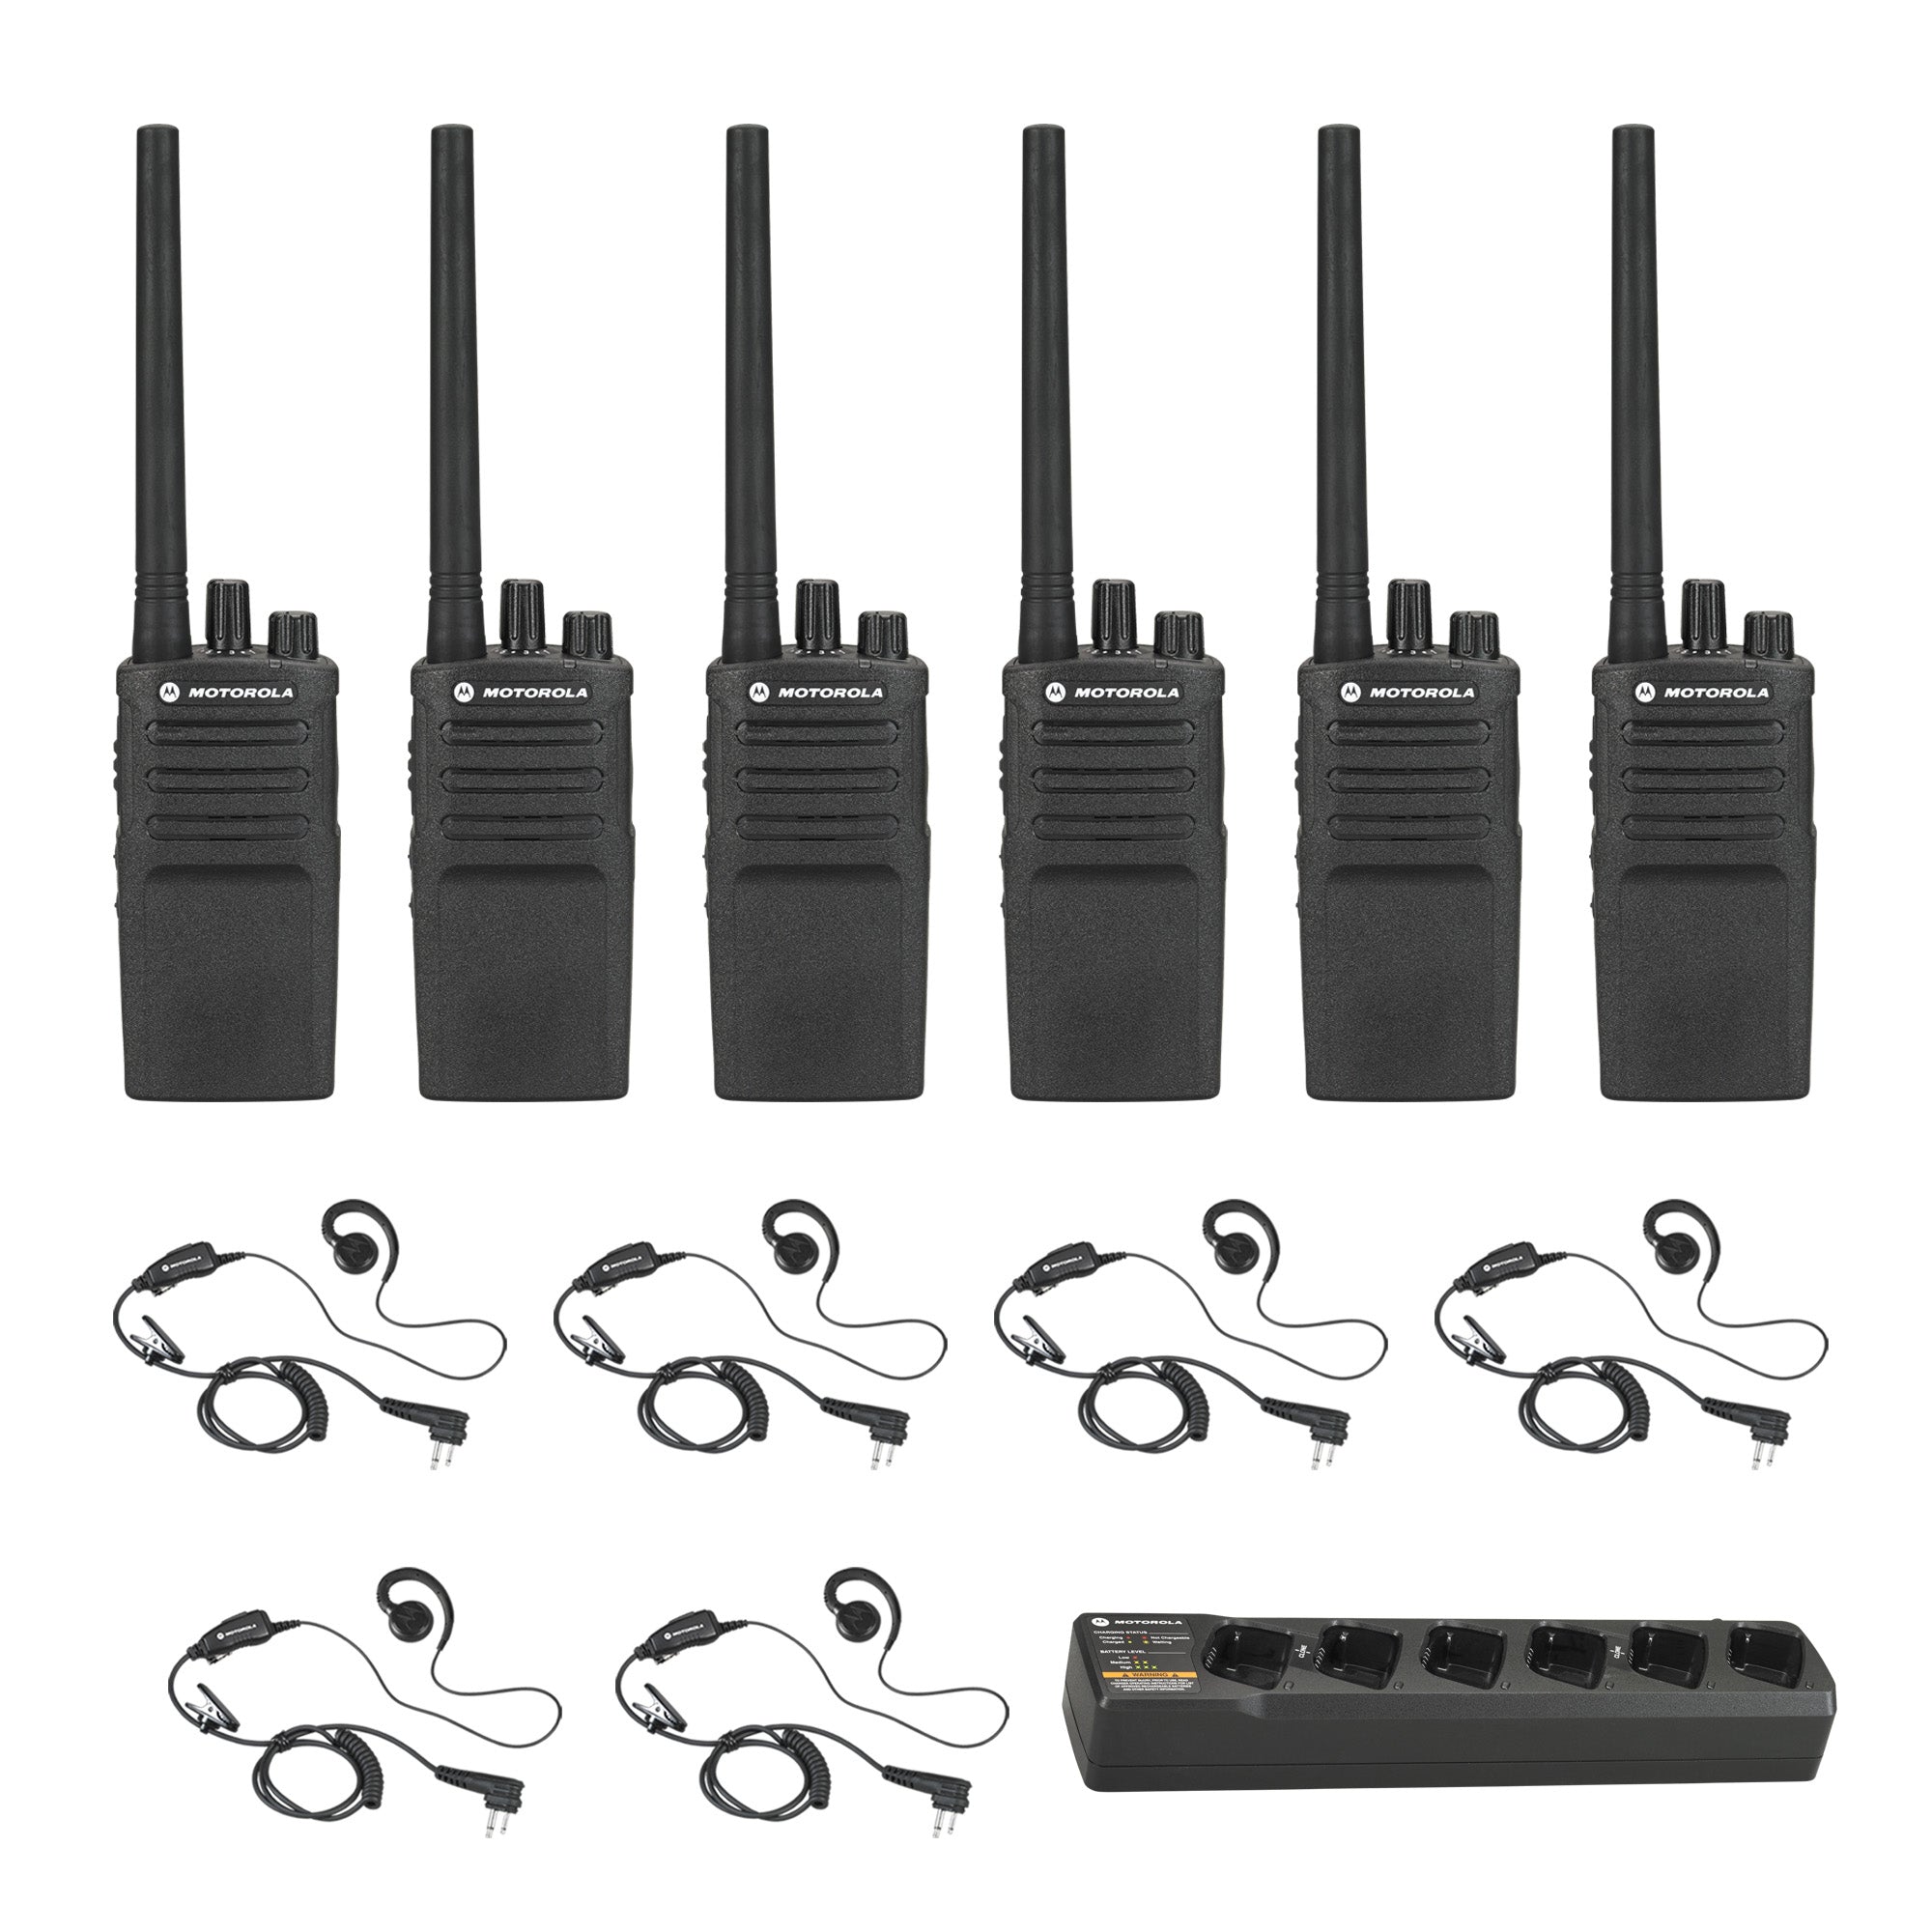 Motorola RMV2080 6 Pack with Multi Unit Charger and Headsets